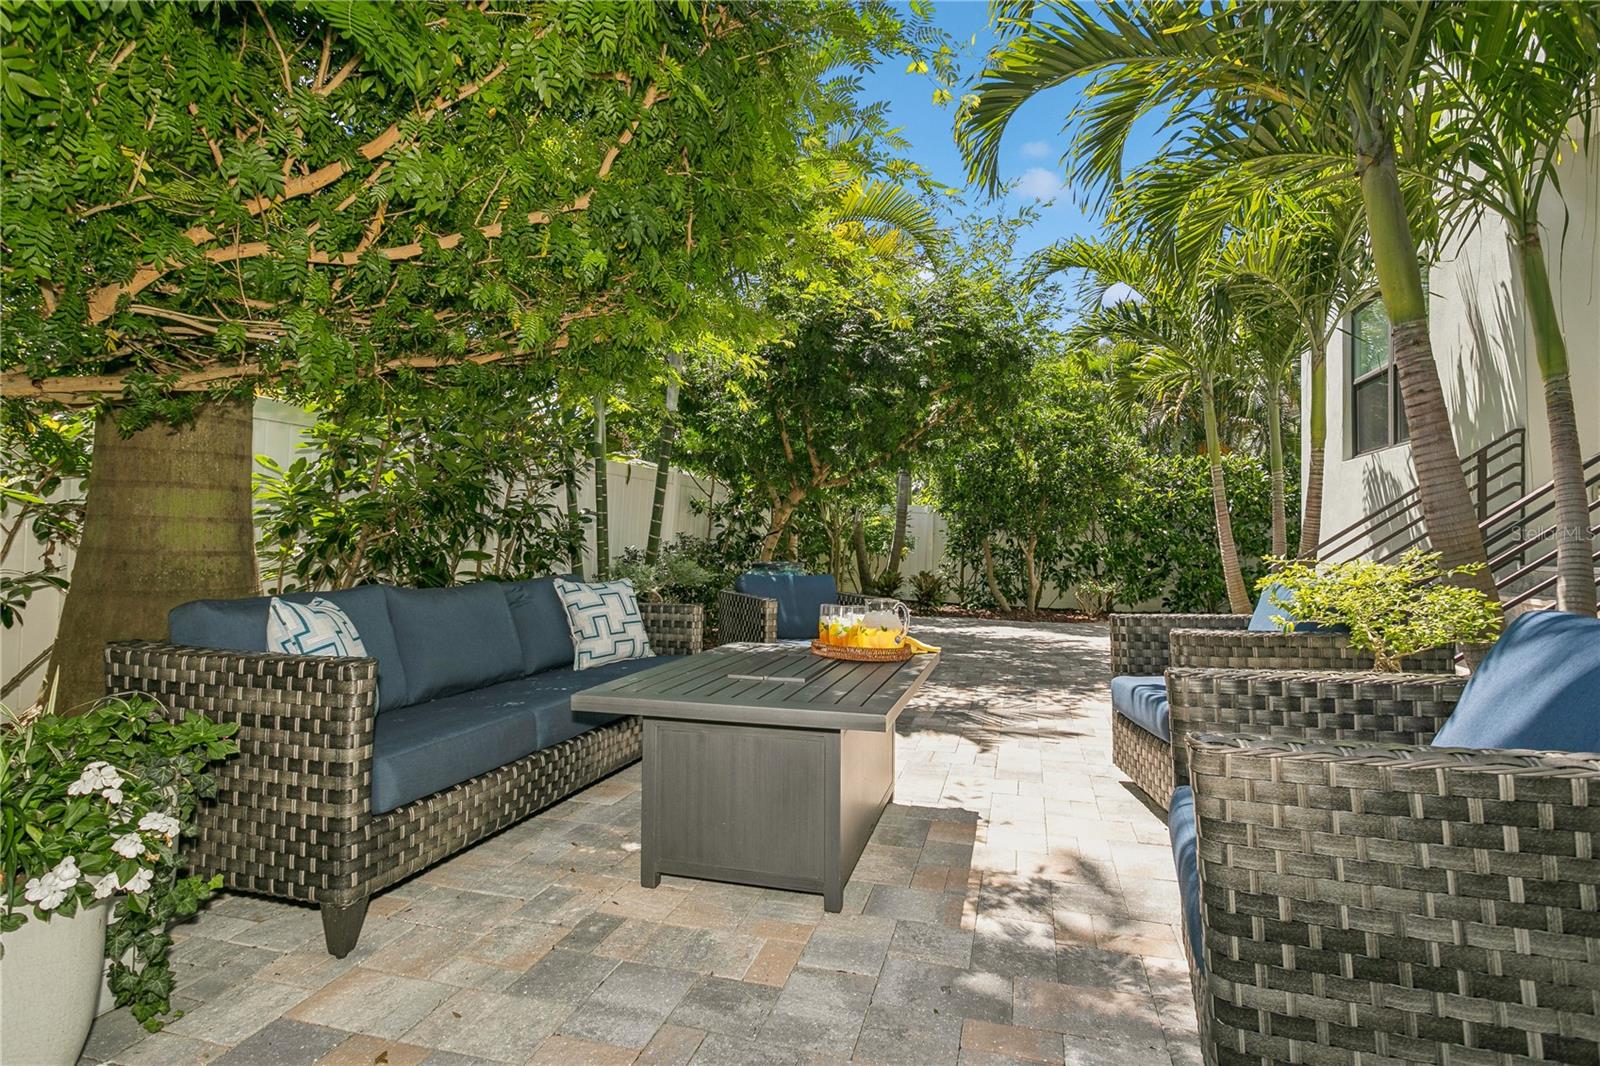 Backyard with mature lush landscaping that provides privacy and shade...